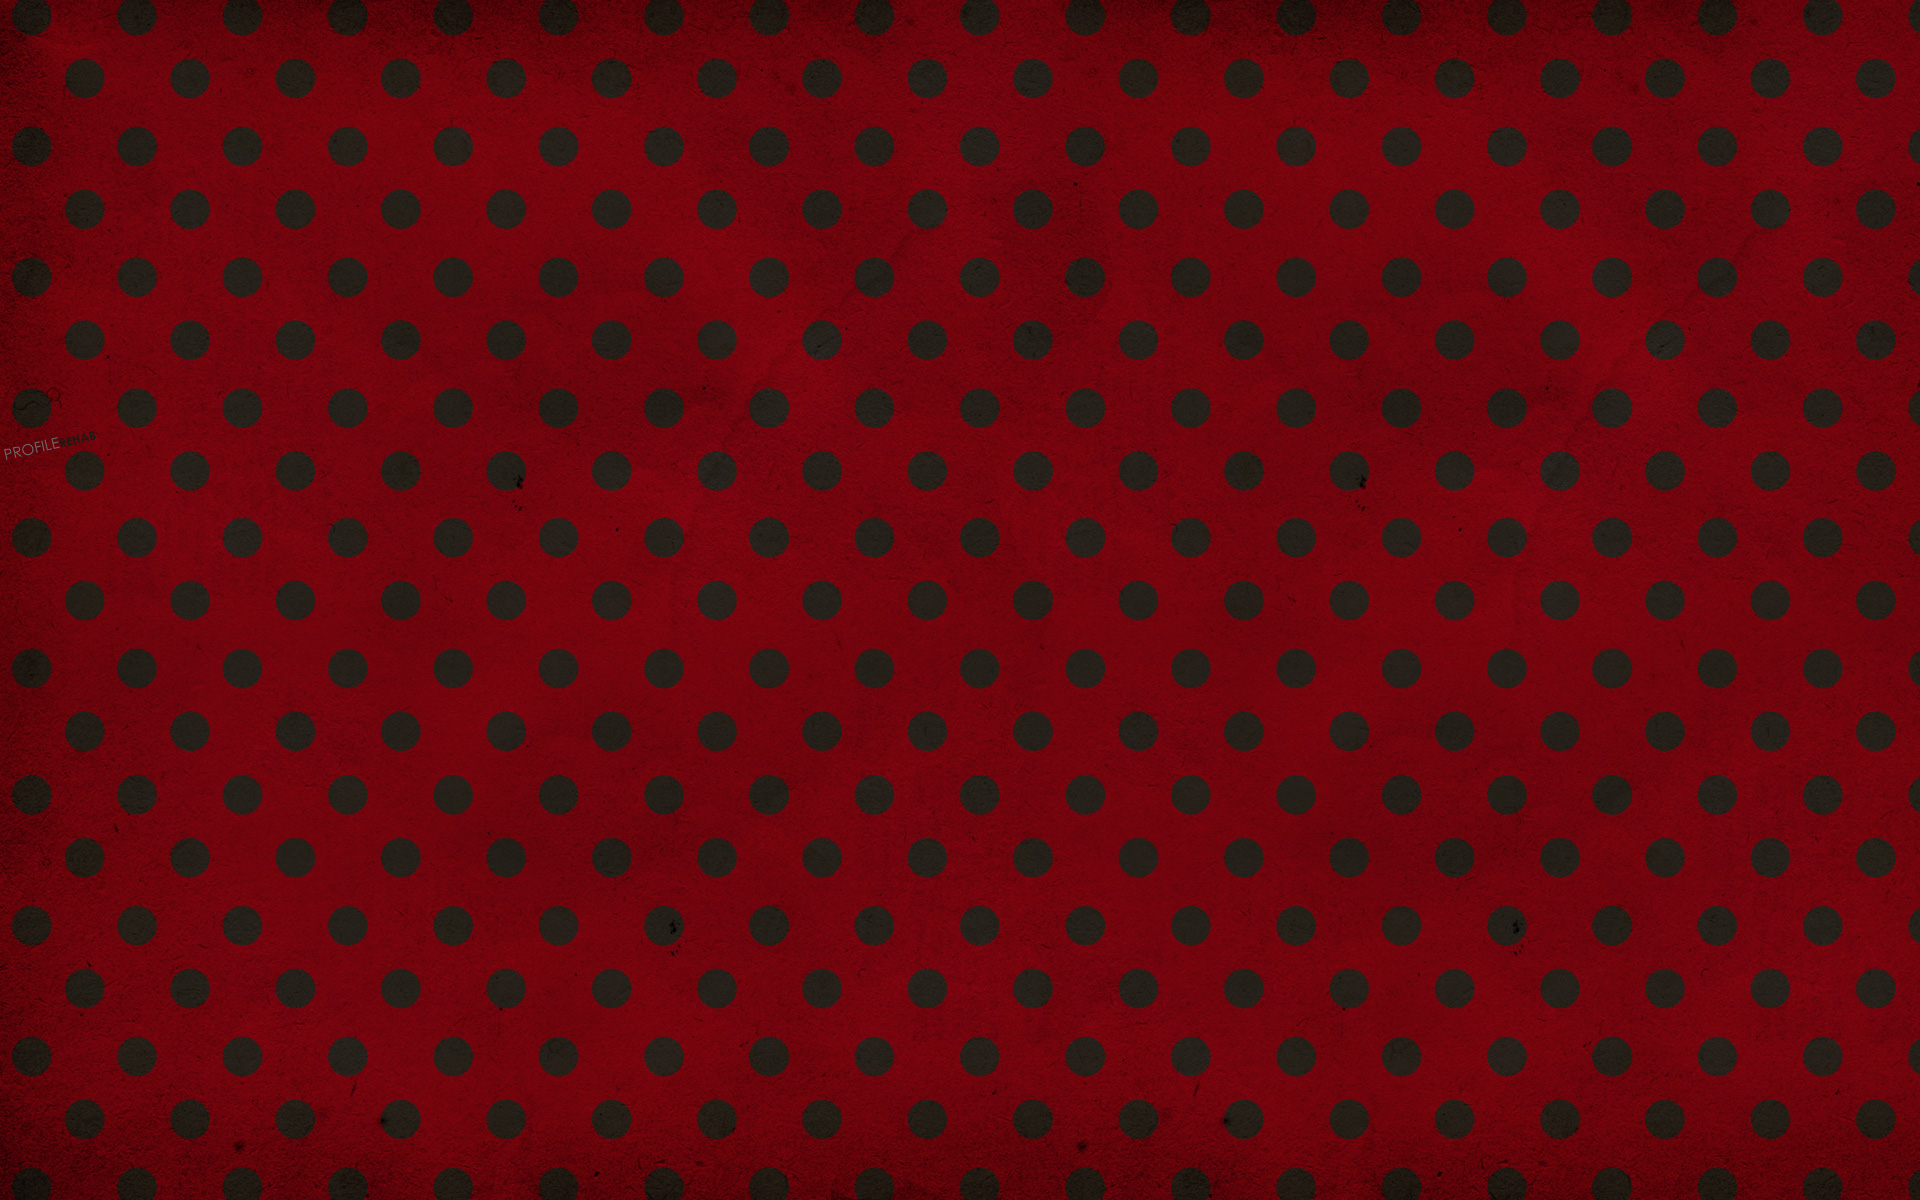 Background Design Red Scenic Theme Polkadotted Designs